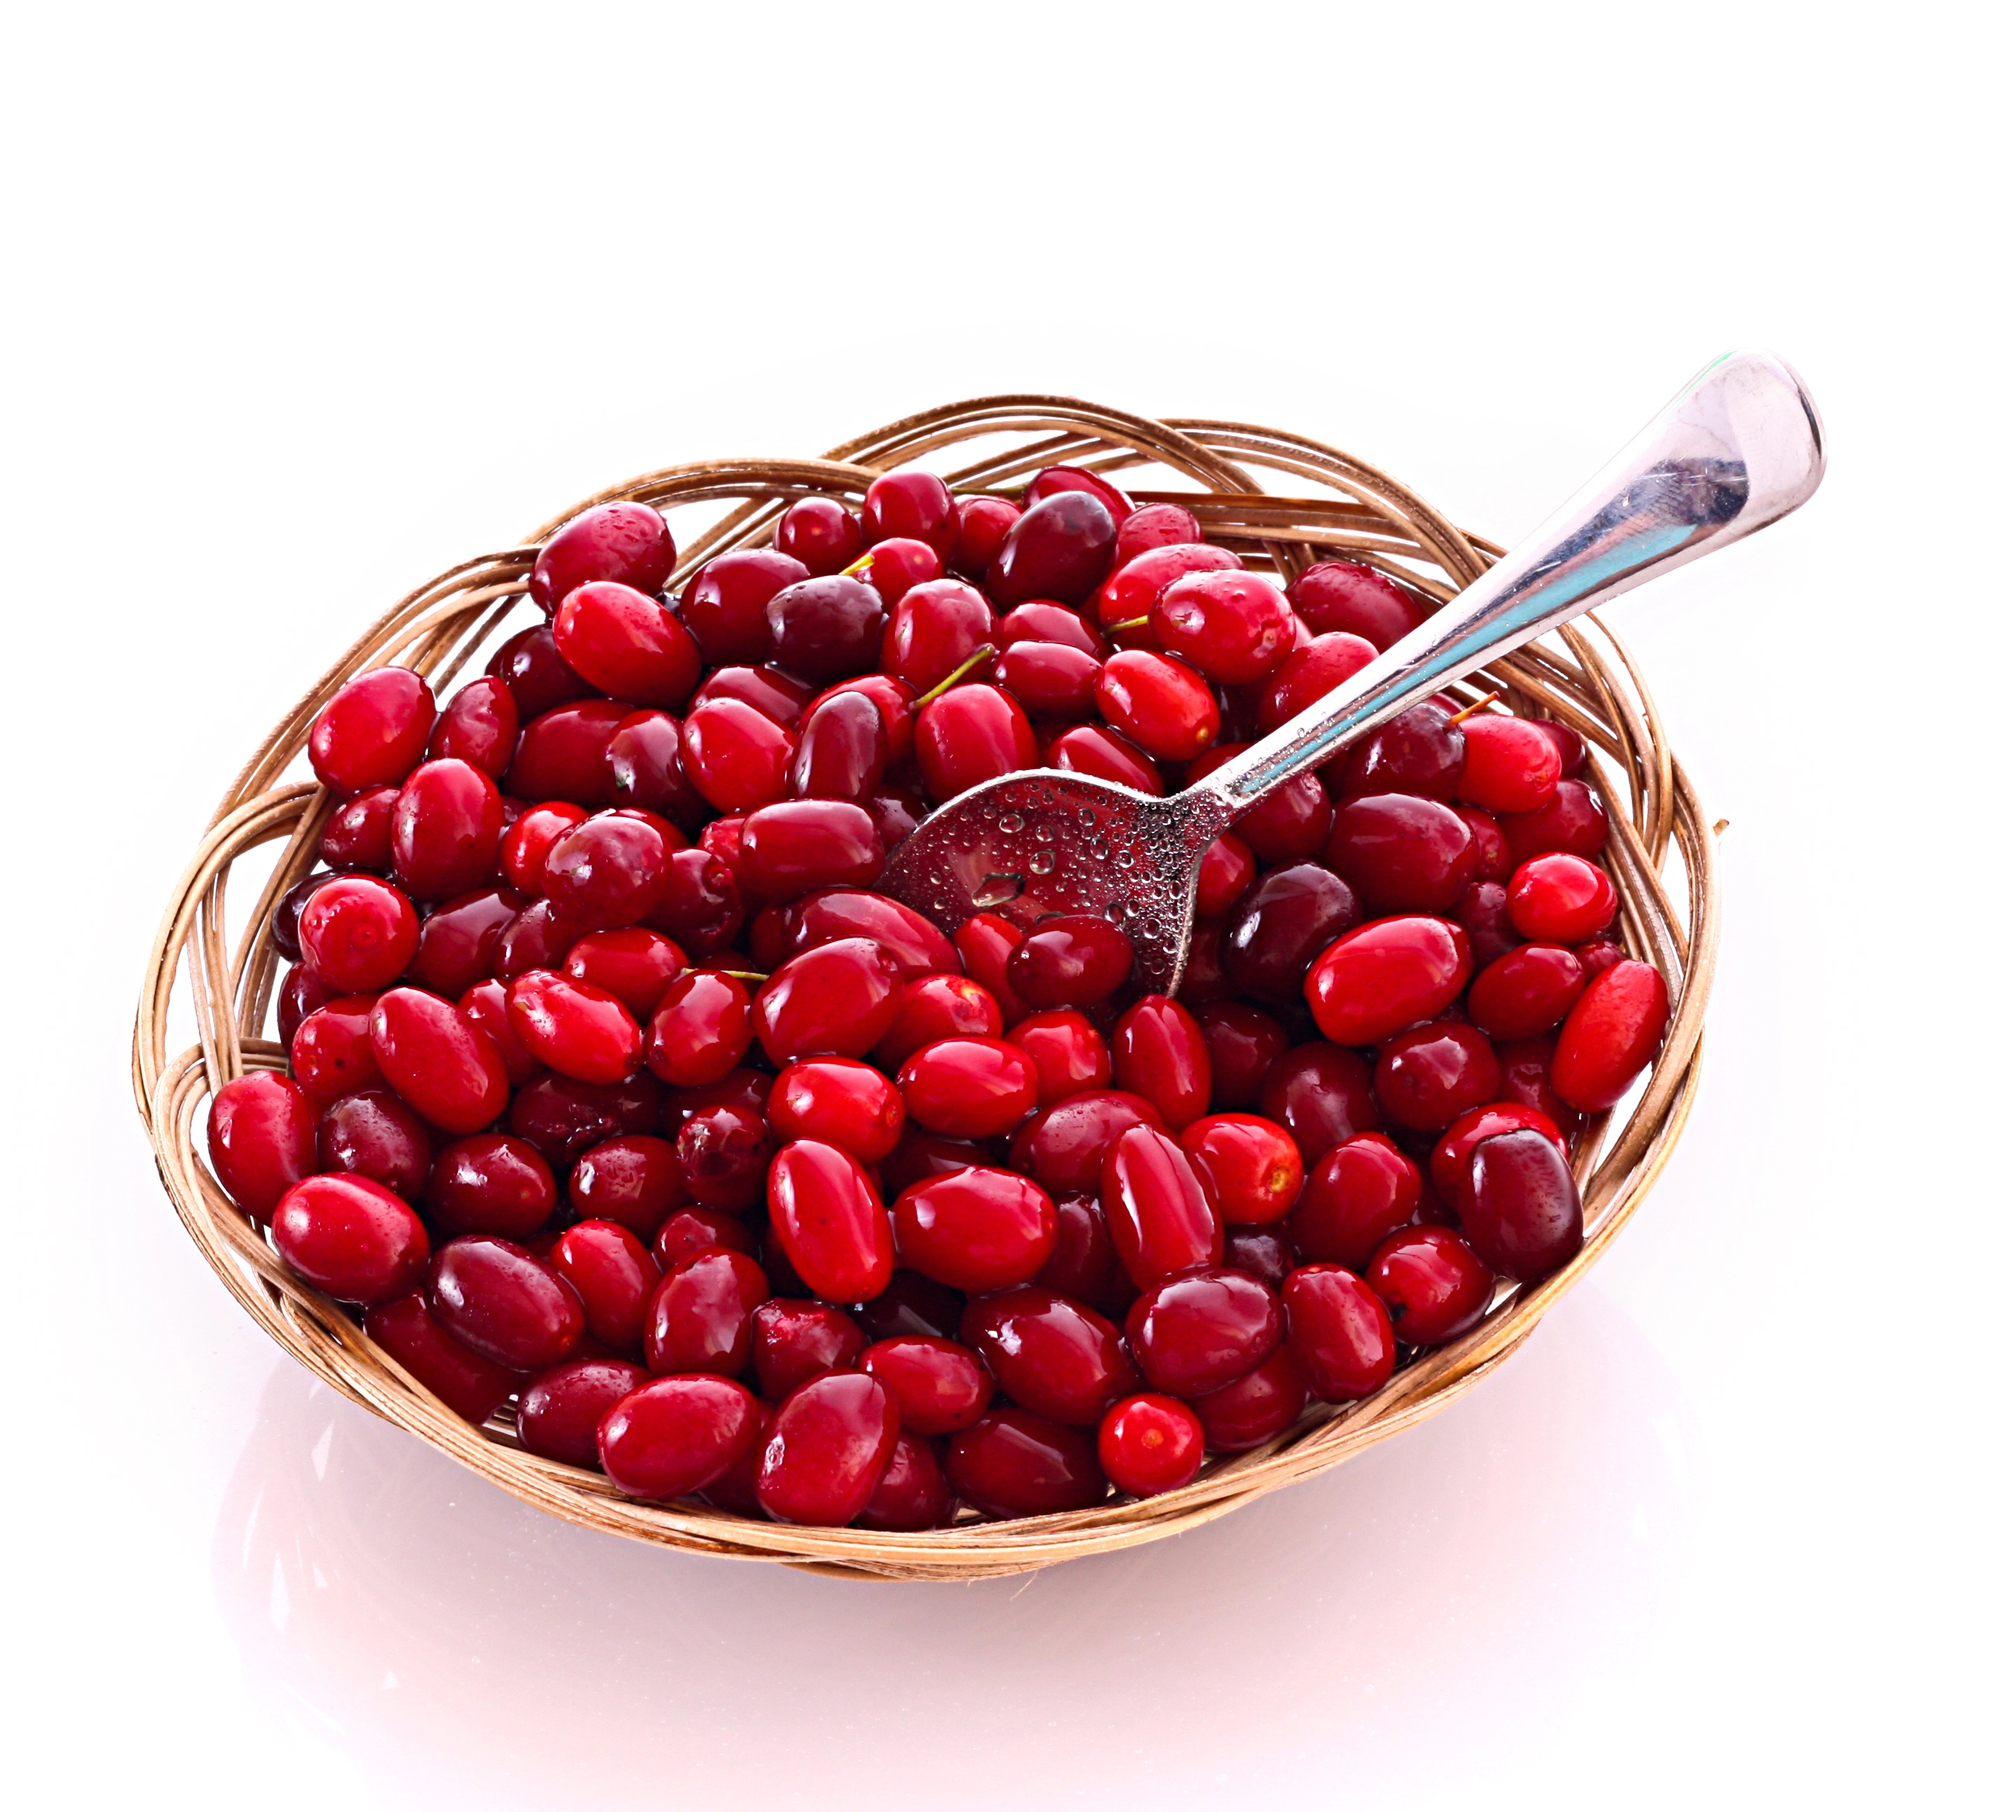 Do cranberries have seeds? with a spoon in a bowl on white background